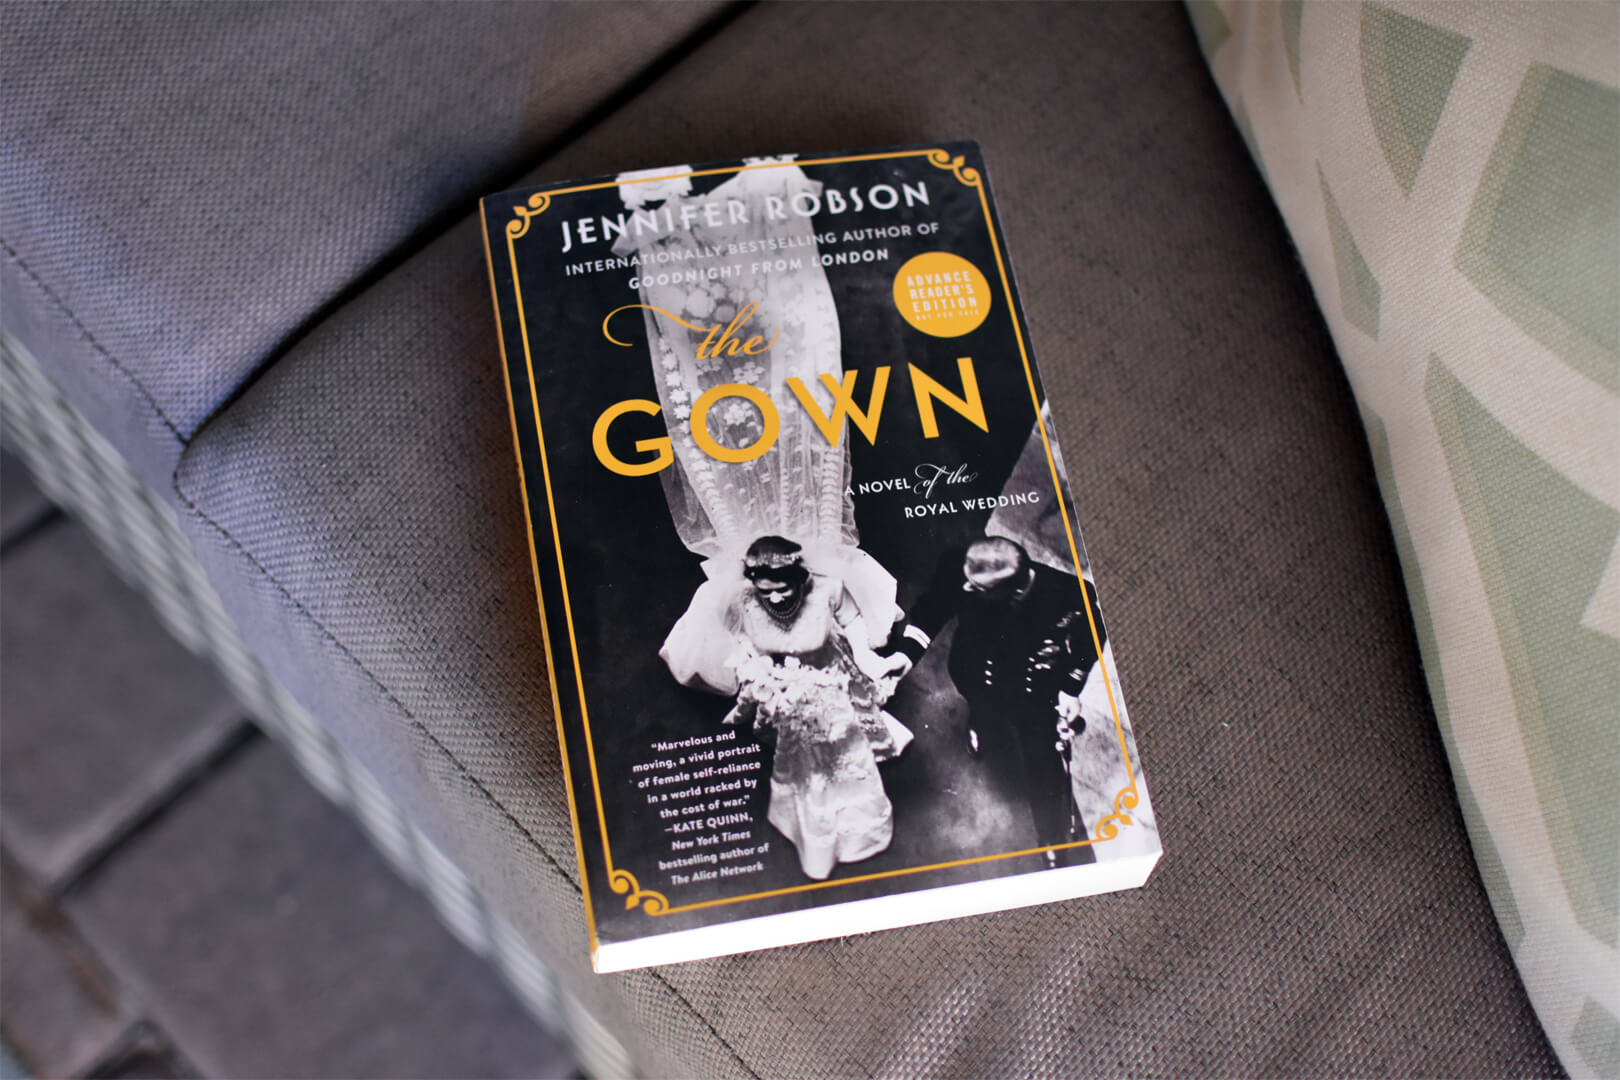 Book Club Questions for The Gown by Jennifer Robson